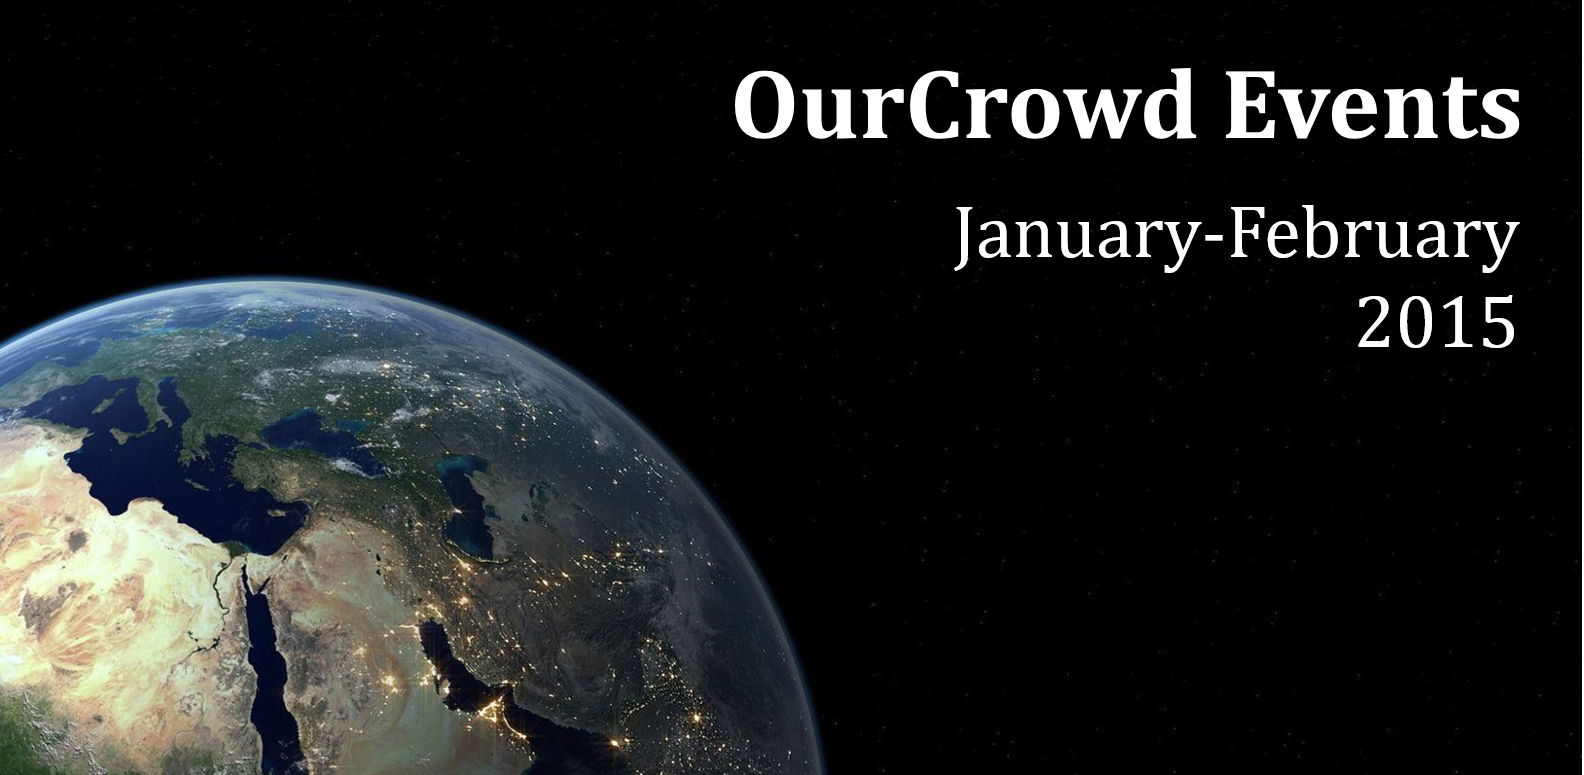 ourcrowd-events-january-february-2015-ourcrowd